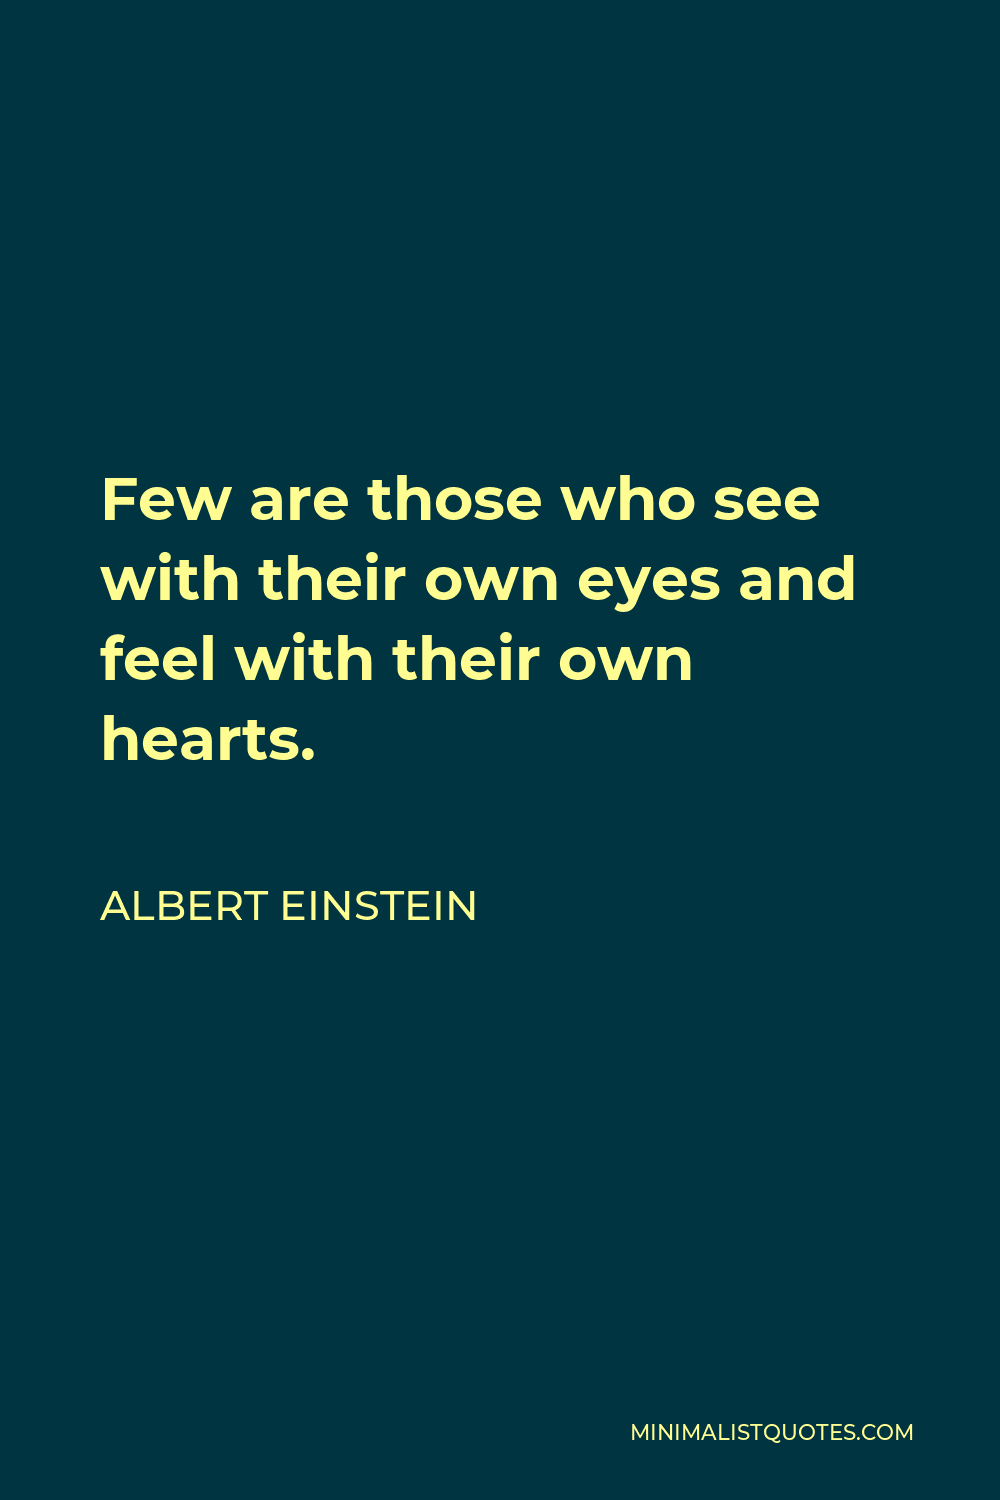 Albert Einstein Quote - Few are those who see with their own eyes and feel with their own hearts.